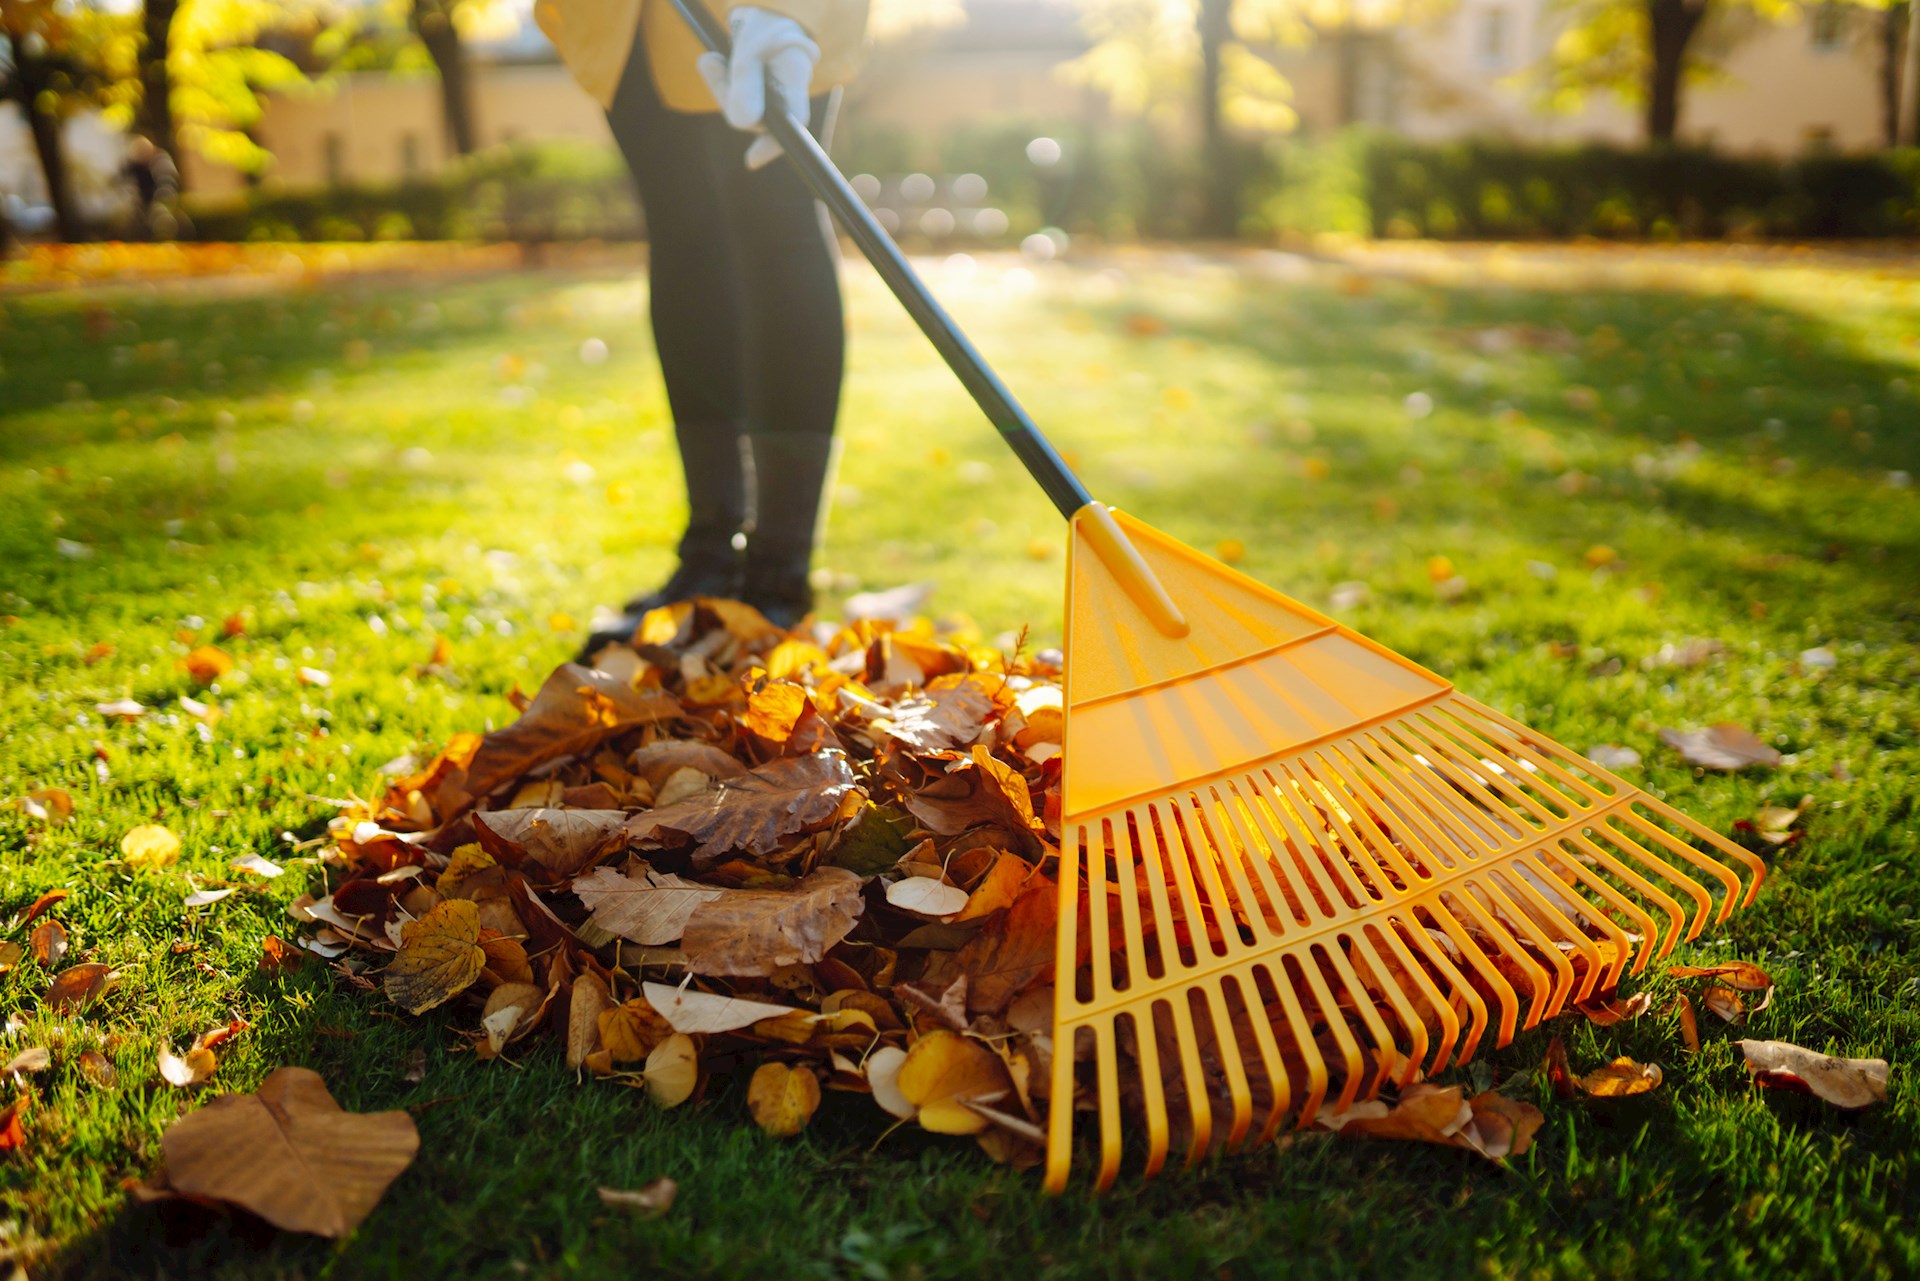 Autumn safety tips for outdoor chores - WellSpan Health